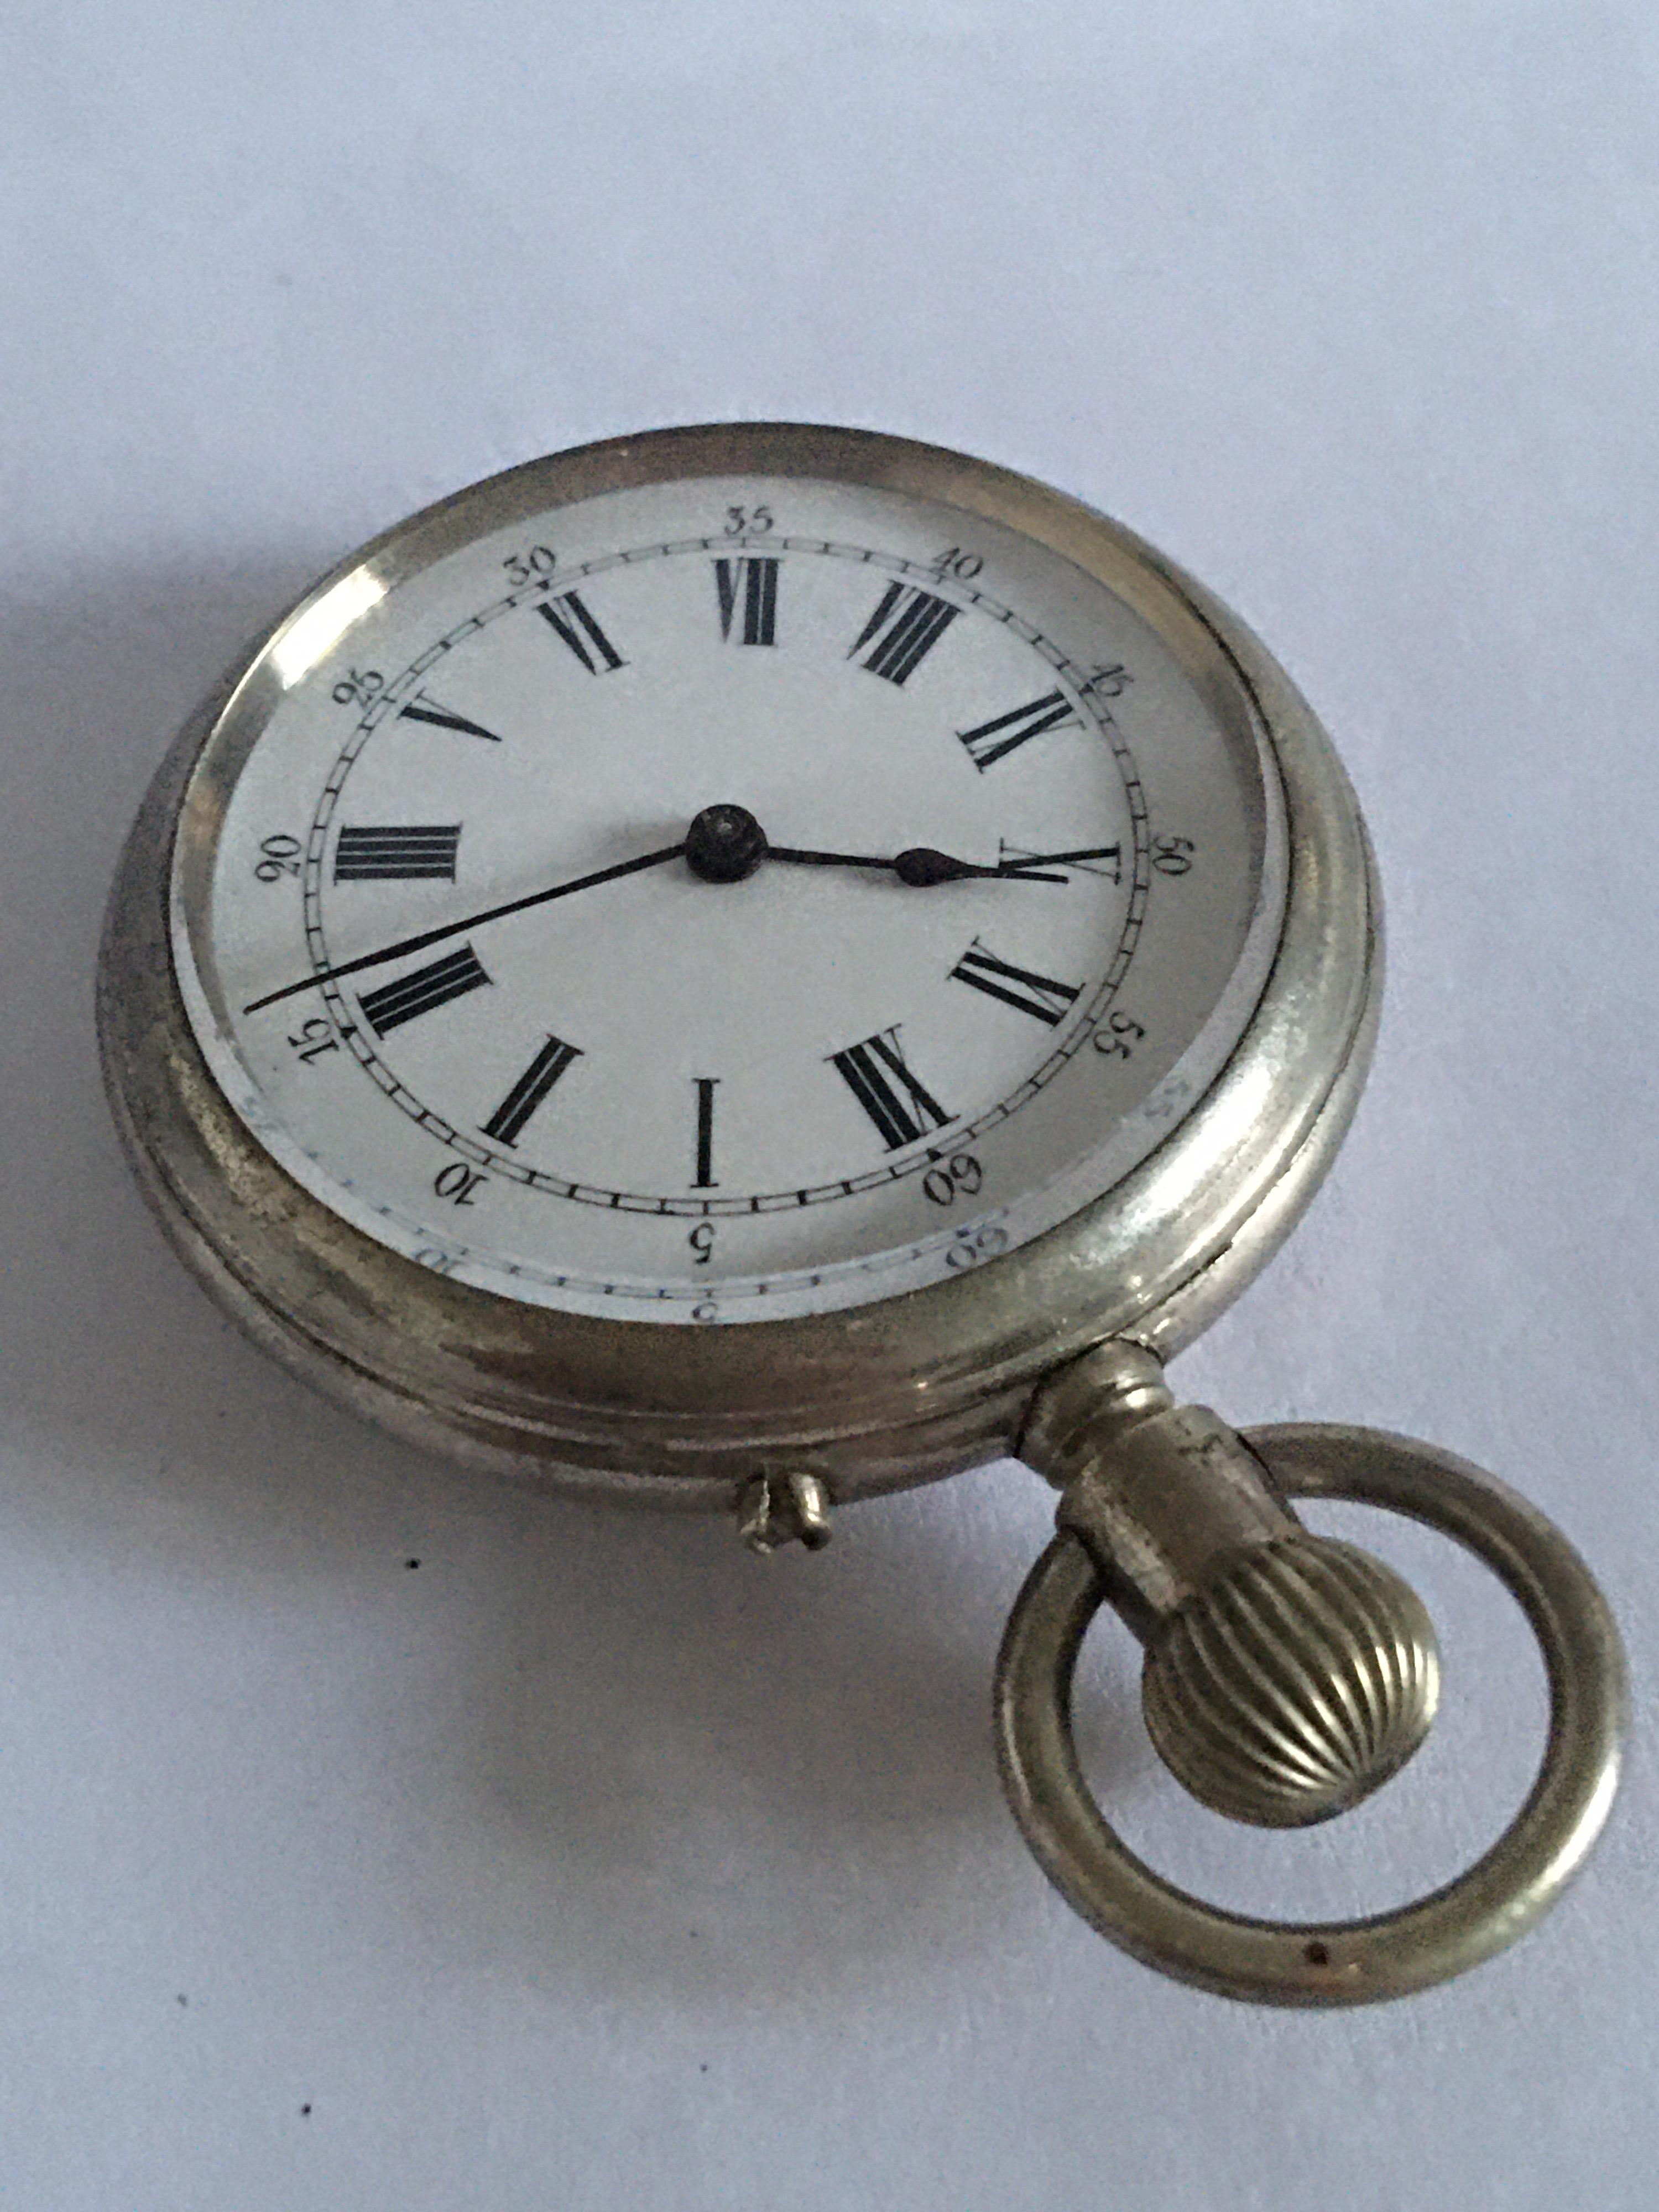 This lovely small watch is working and ticking well. 
Back cover case is a bit tarnished as shown. 

Please study the images carefully as form part of the description. 